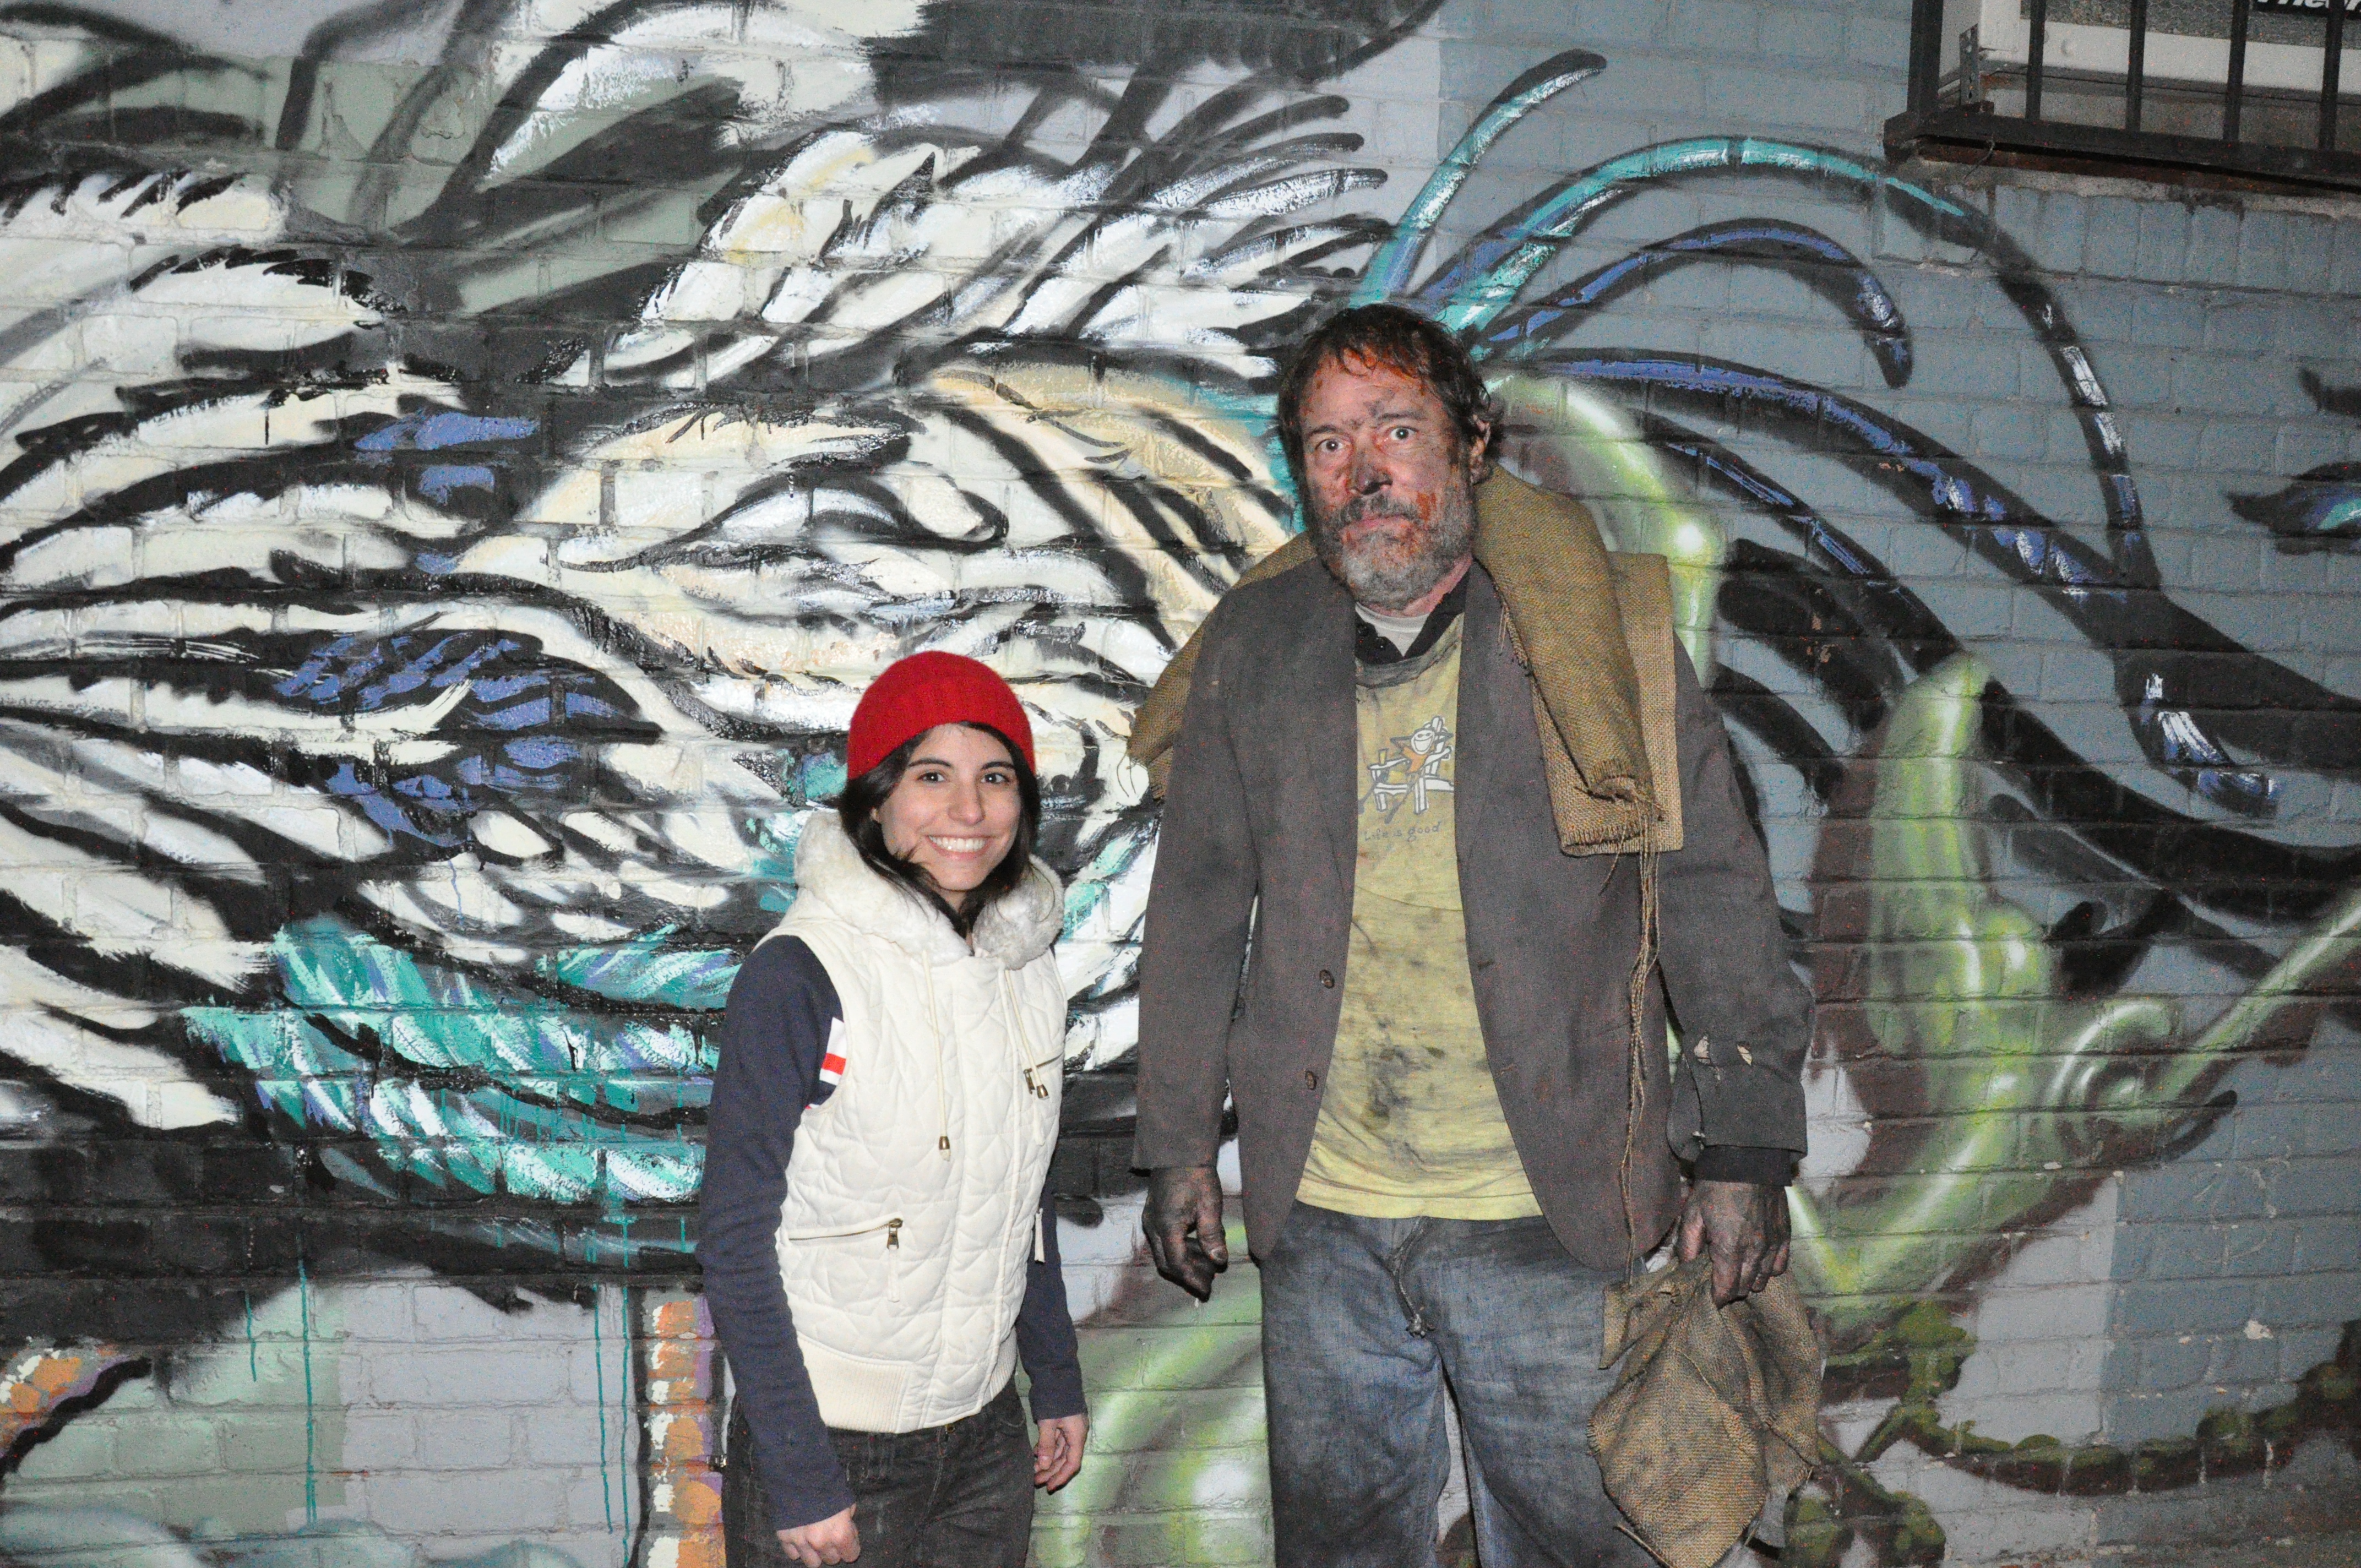 Romina and Manuel Espinosa on the set of The Insomniac.